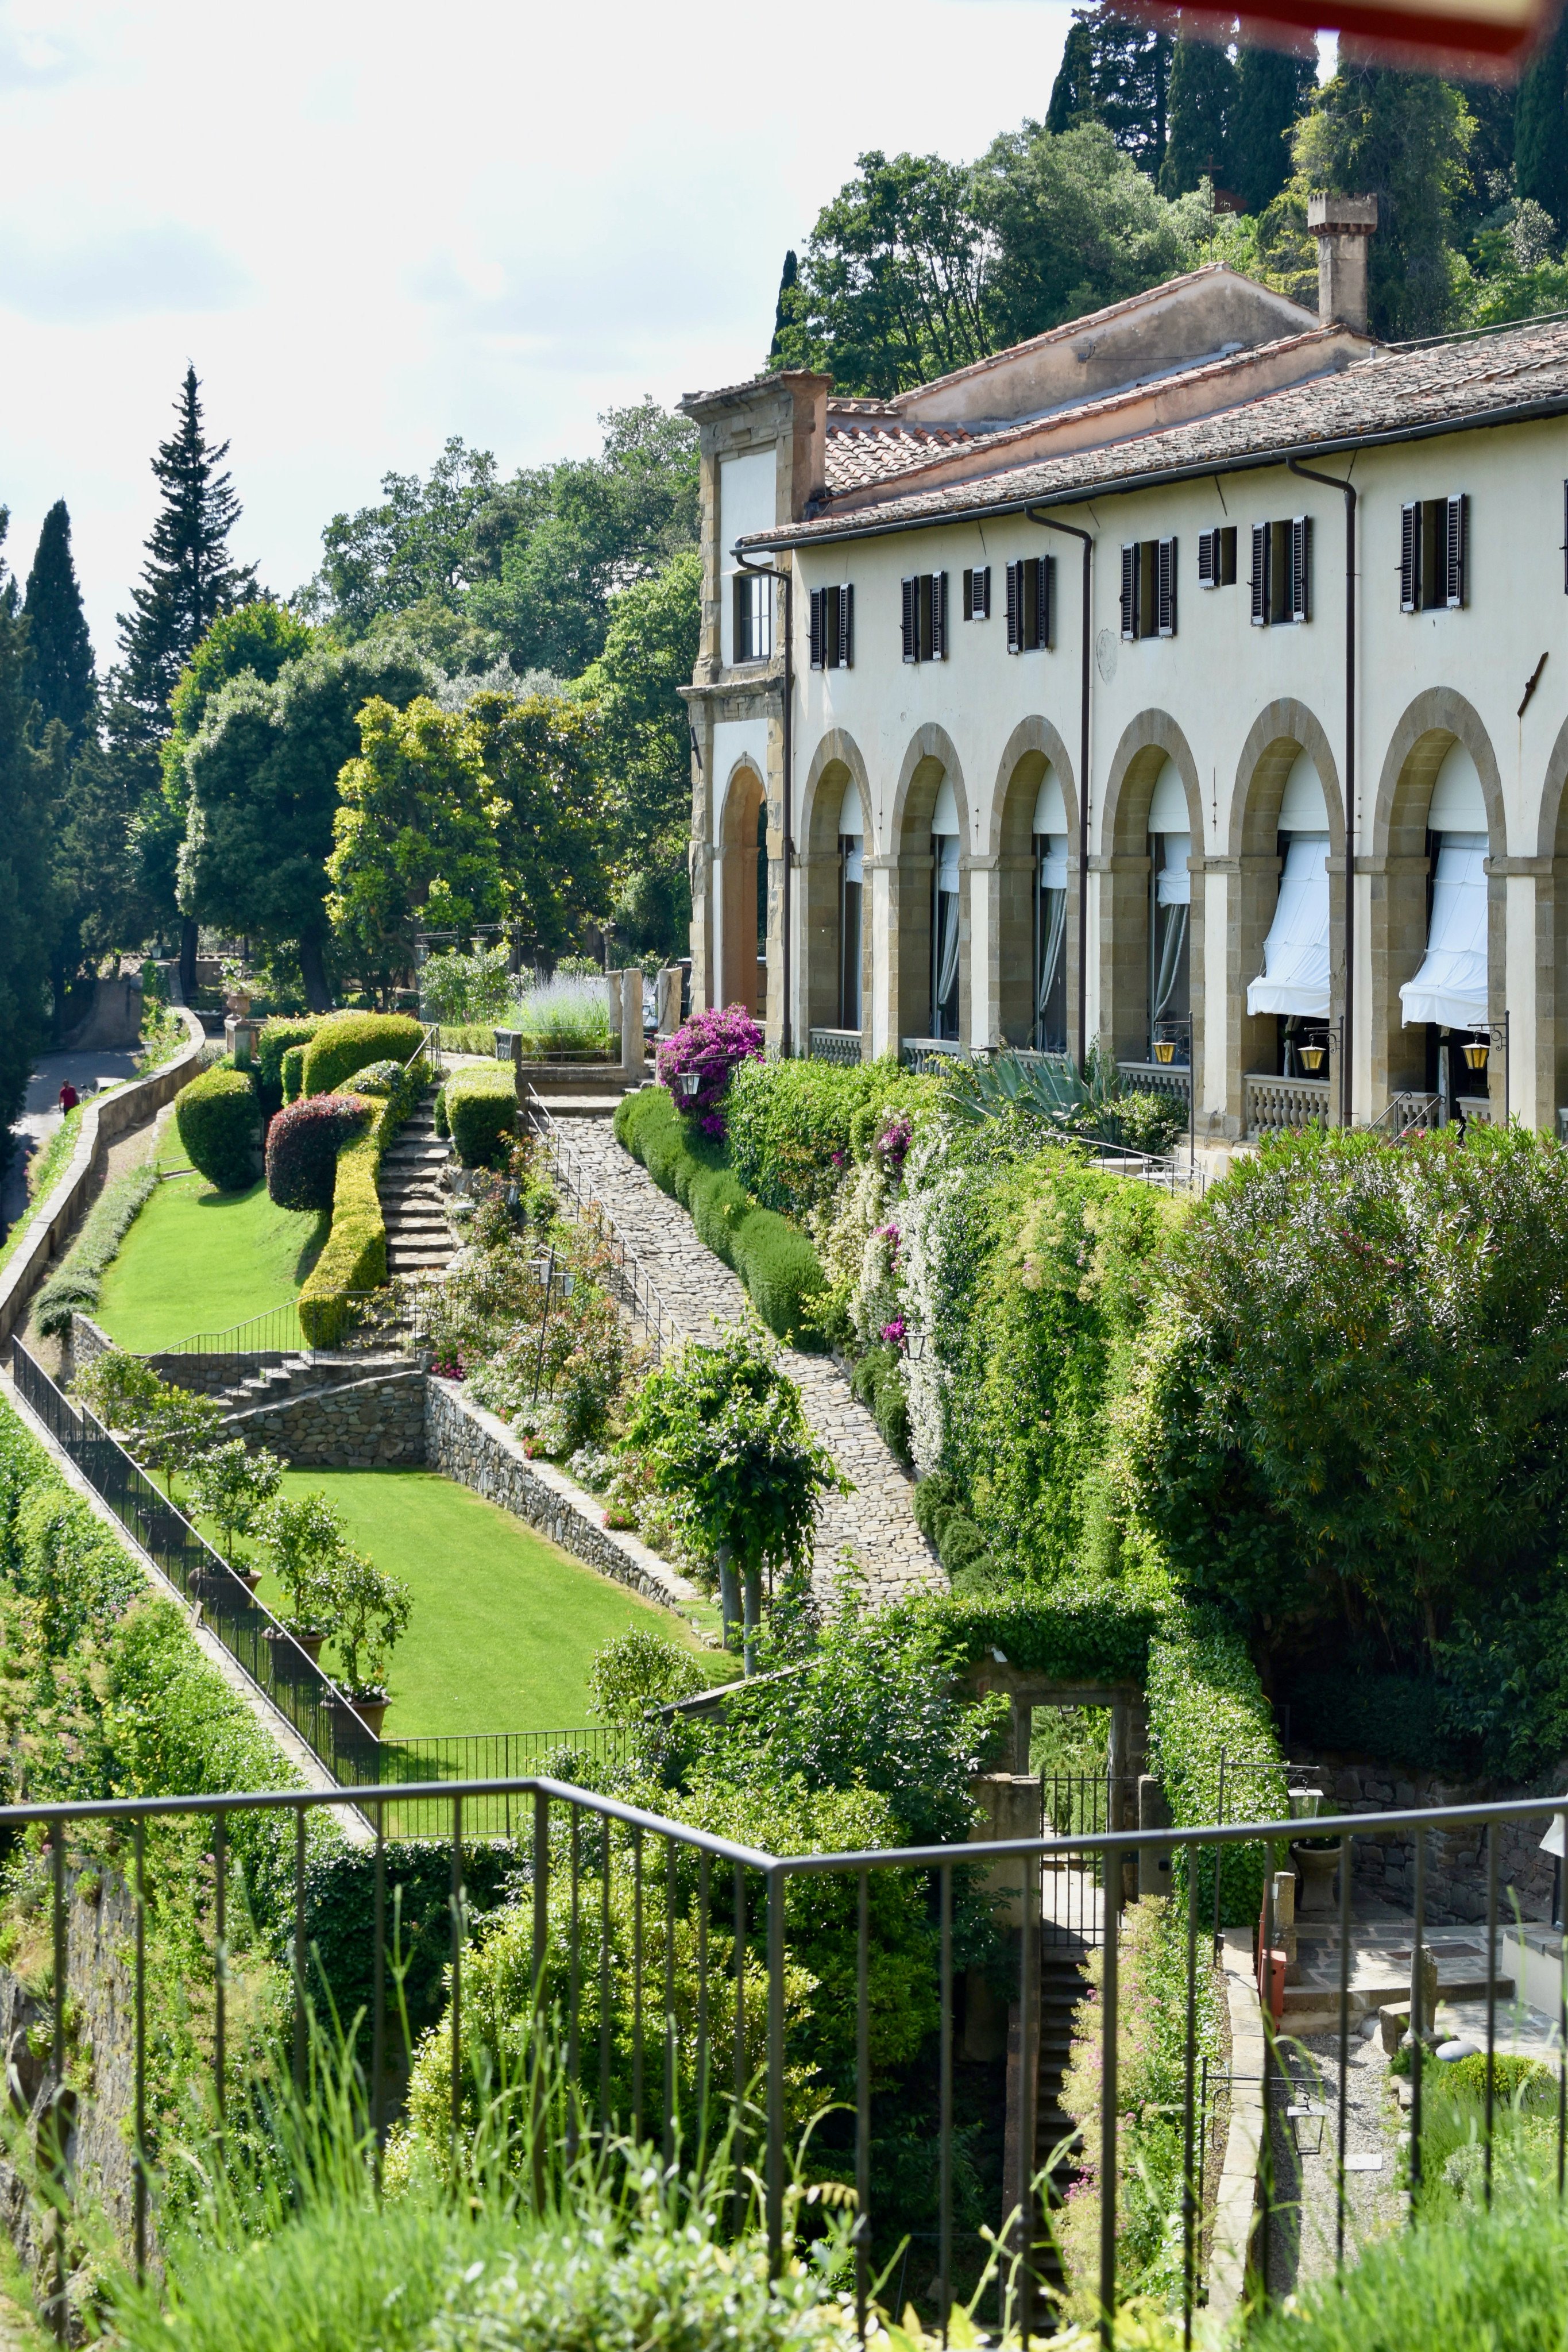 The Villa San Michele, a Belmond Hotel, in Fiesole, a town near Florence in Tuscany, Italy that offers an escape from the city’s tourist crowds and has long been a draw for authors as varied as Dante, Gertrude Stein and Charles Dickens. Photo: Victoria Burrows